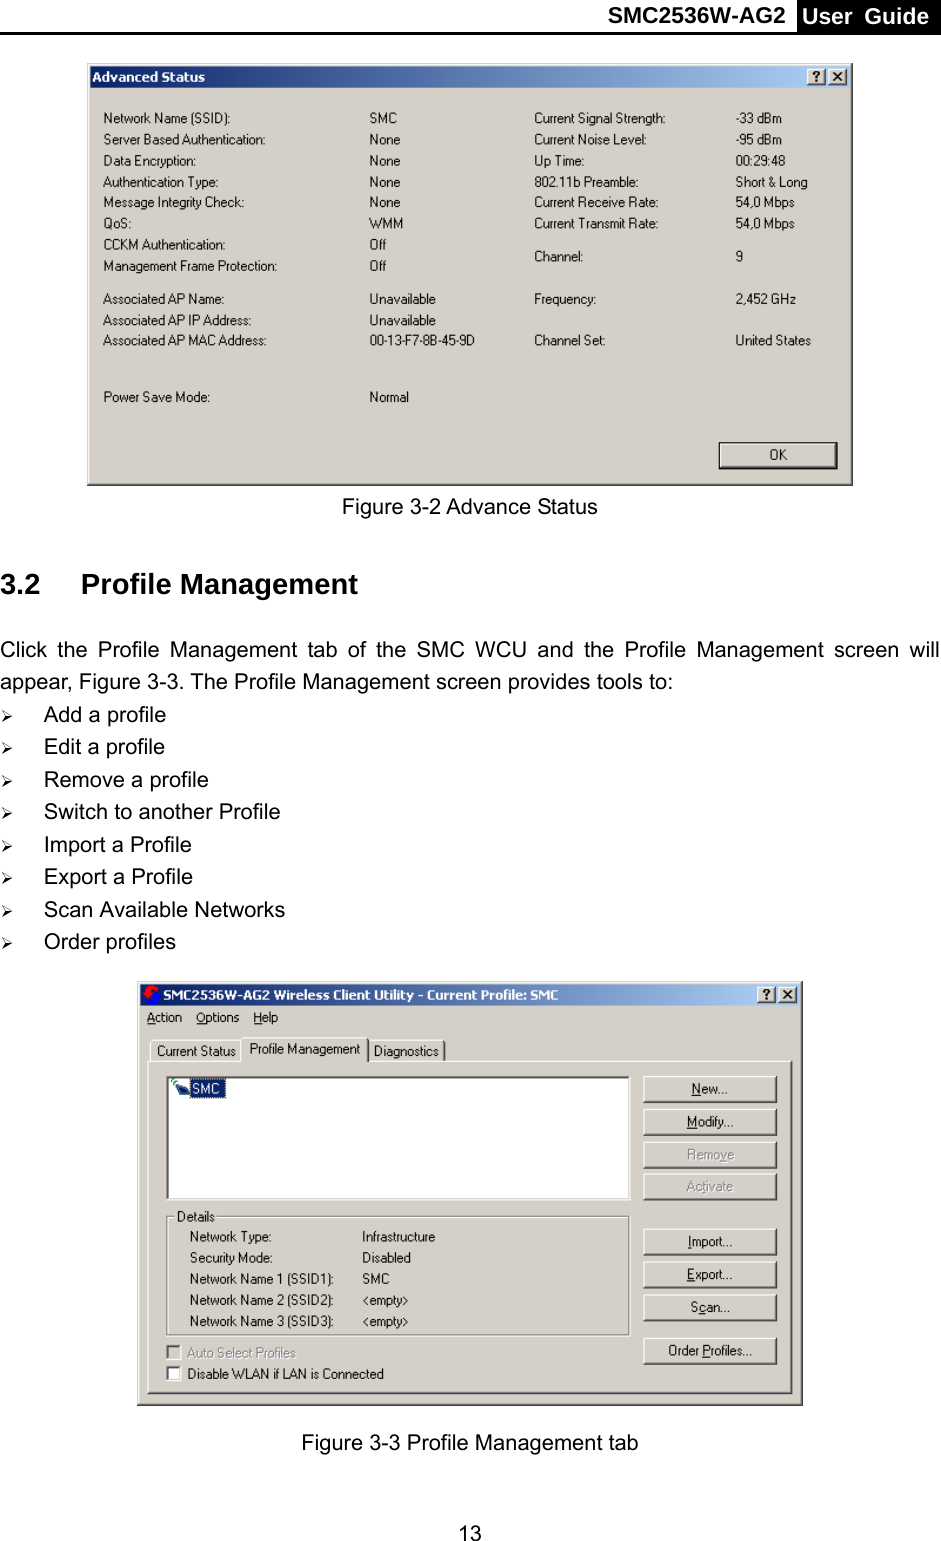 SMC2536W-AG2  User Guide   13 Figure 3-2 Advance Status 3.2  Profile Management Click the Profile Management tab of the SMC WCU and the Profile Management screen will appear, Figure 3-3. The Profile Management screen provides tools to: ¾ Add a profile ¾ Edit a profile ¾ Remove a profile ¾ Switch to another Profile ¾ Import a Profile ¾ Export a Profile ¾ Scan Available Networks ¾ Order profiles  Figure 3-3 Profile Management tab 